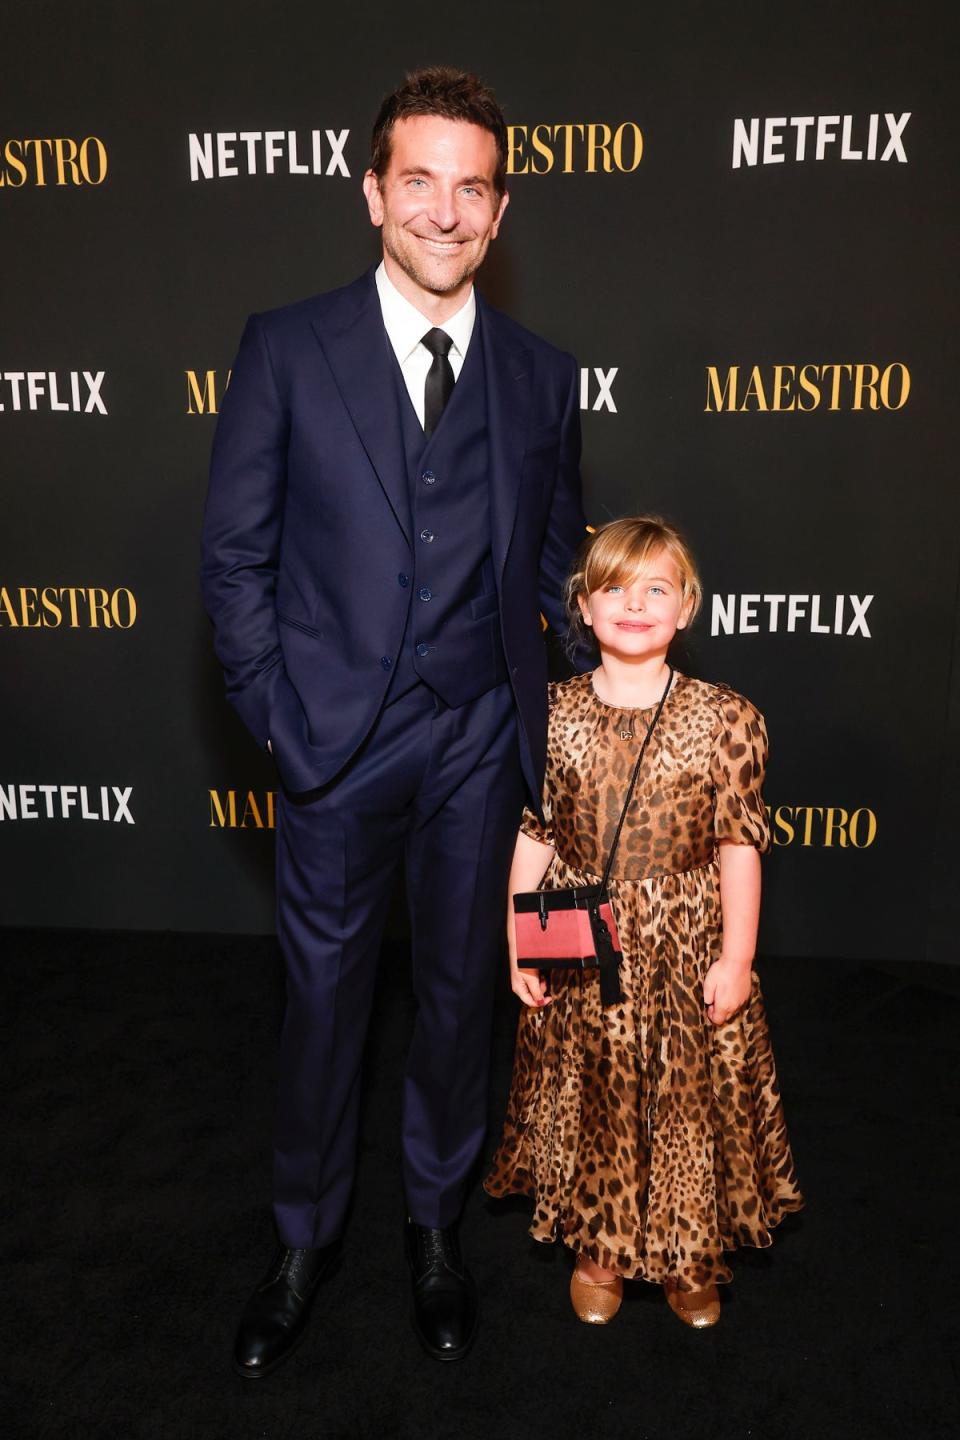 Bradley Cooper pictured with daughter Lea at a screening of Maestro on December 12 (Getty Images for Netflix)